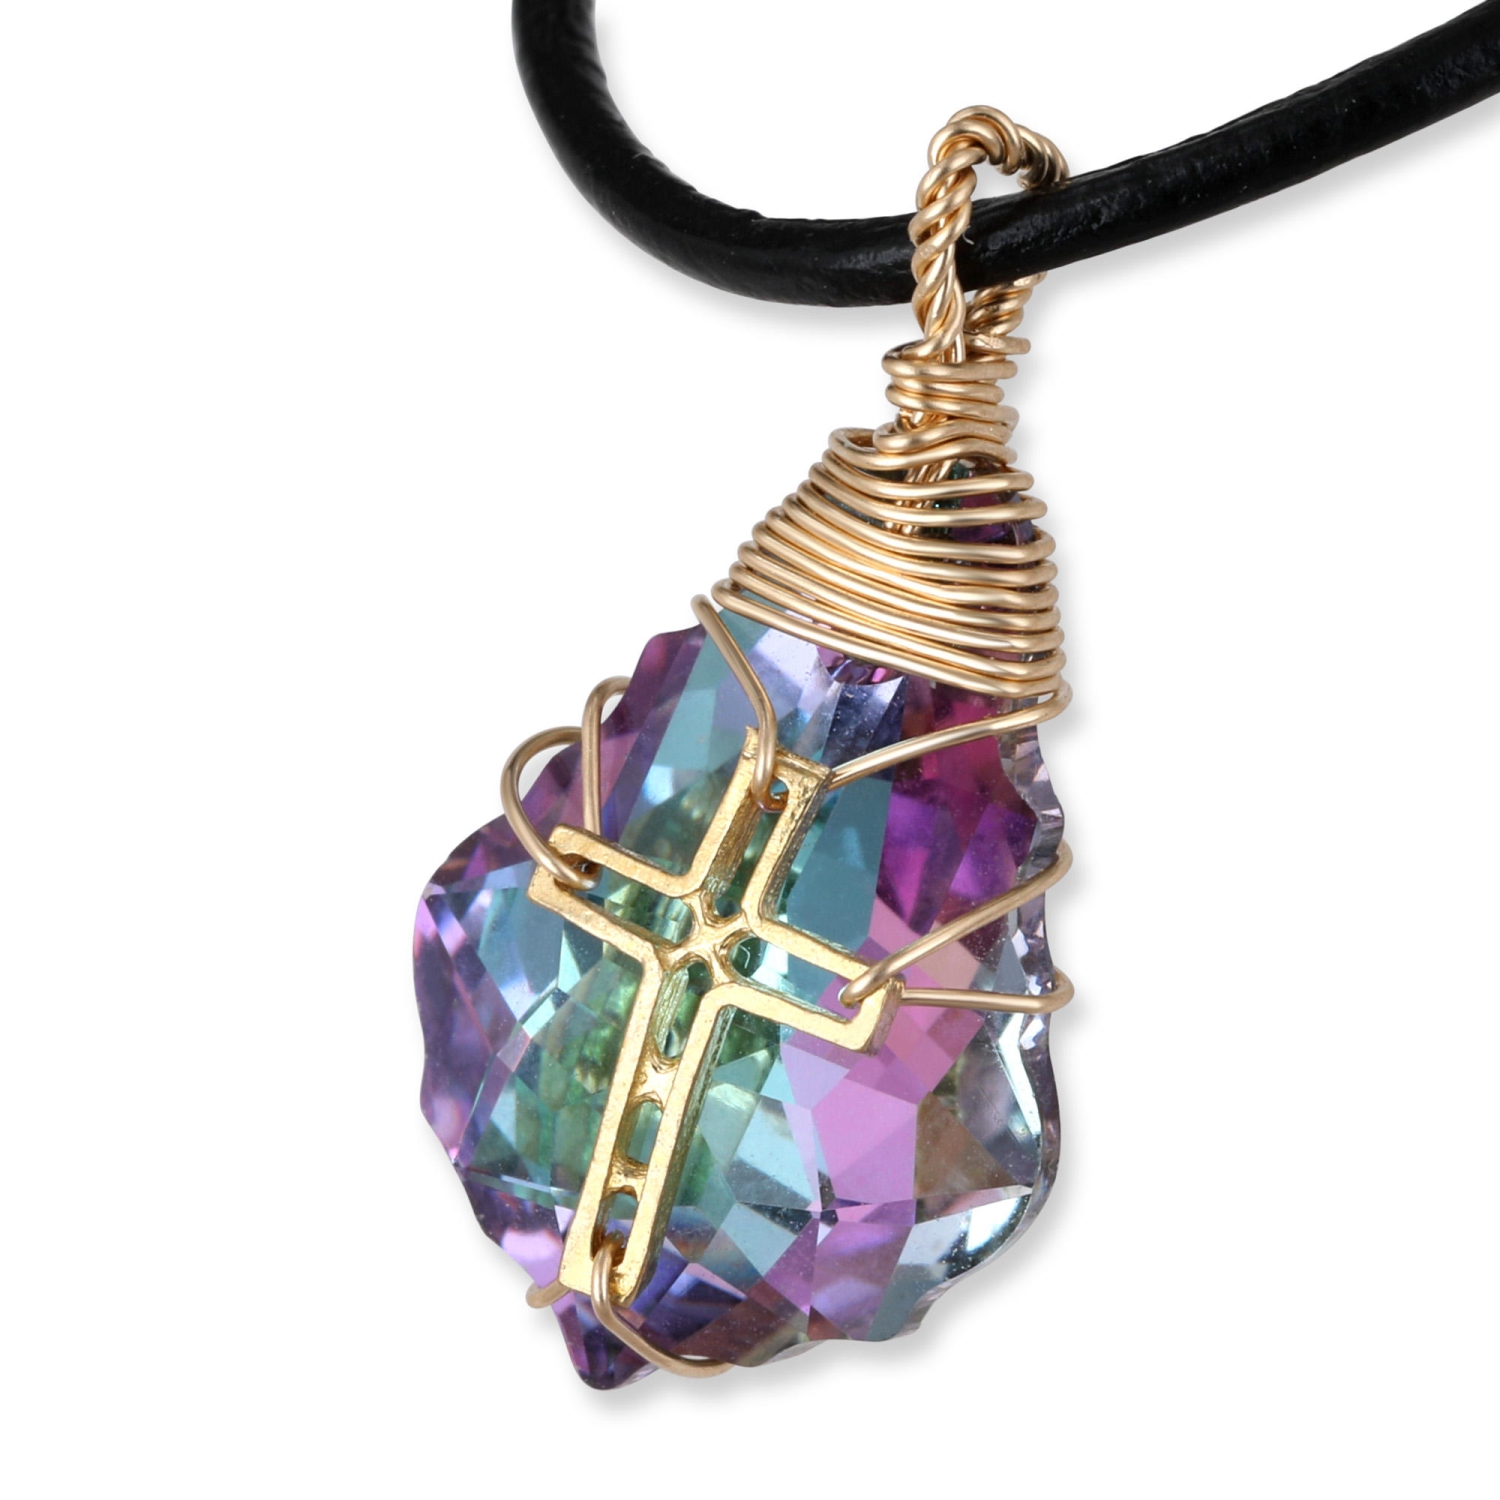 Swarovski Crystal and Gold Filled Postmodern Cross Necklace (Iridescent Blue/Purple) - 1